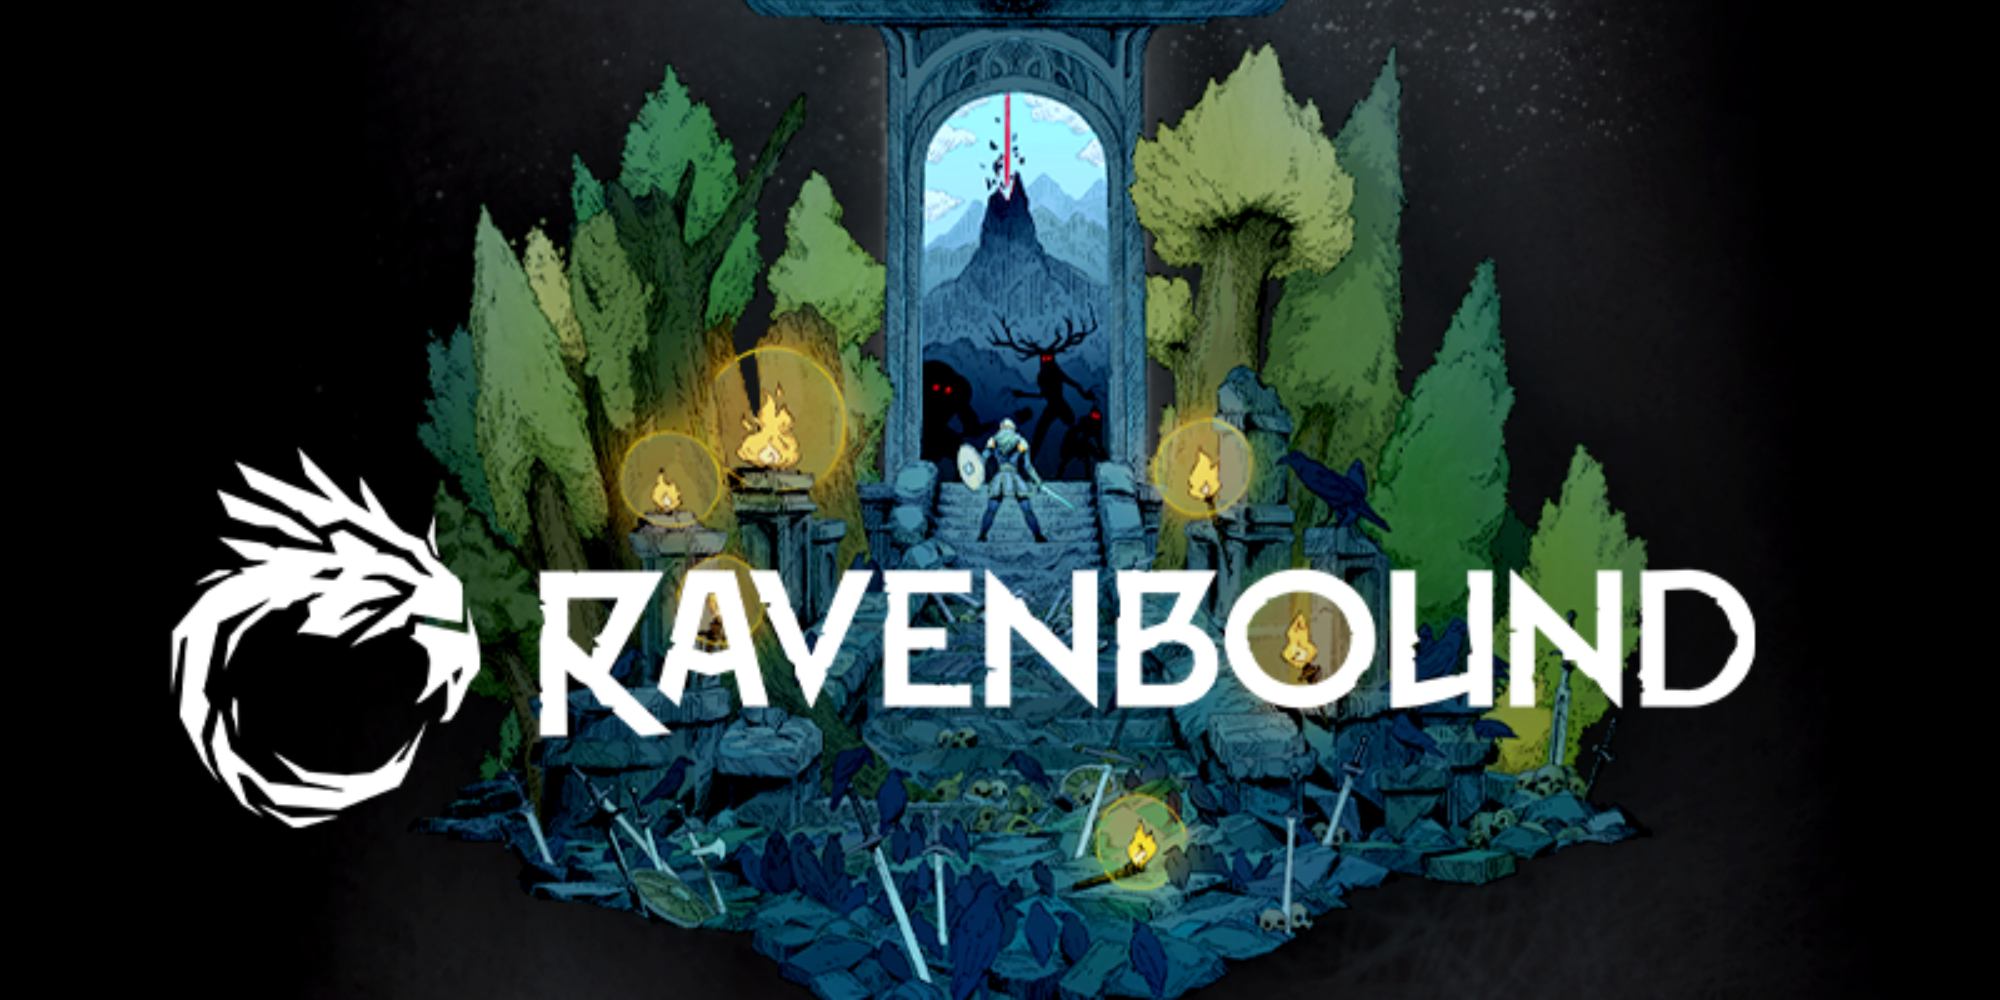 Ravenbound Review key art with game logo